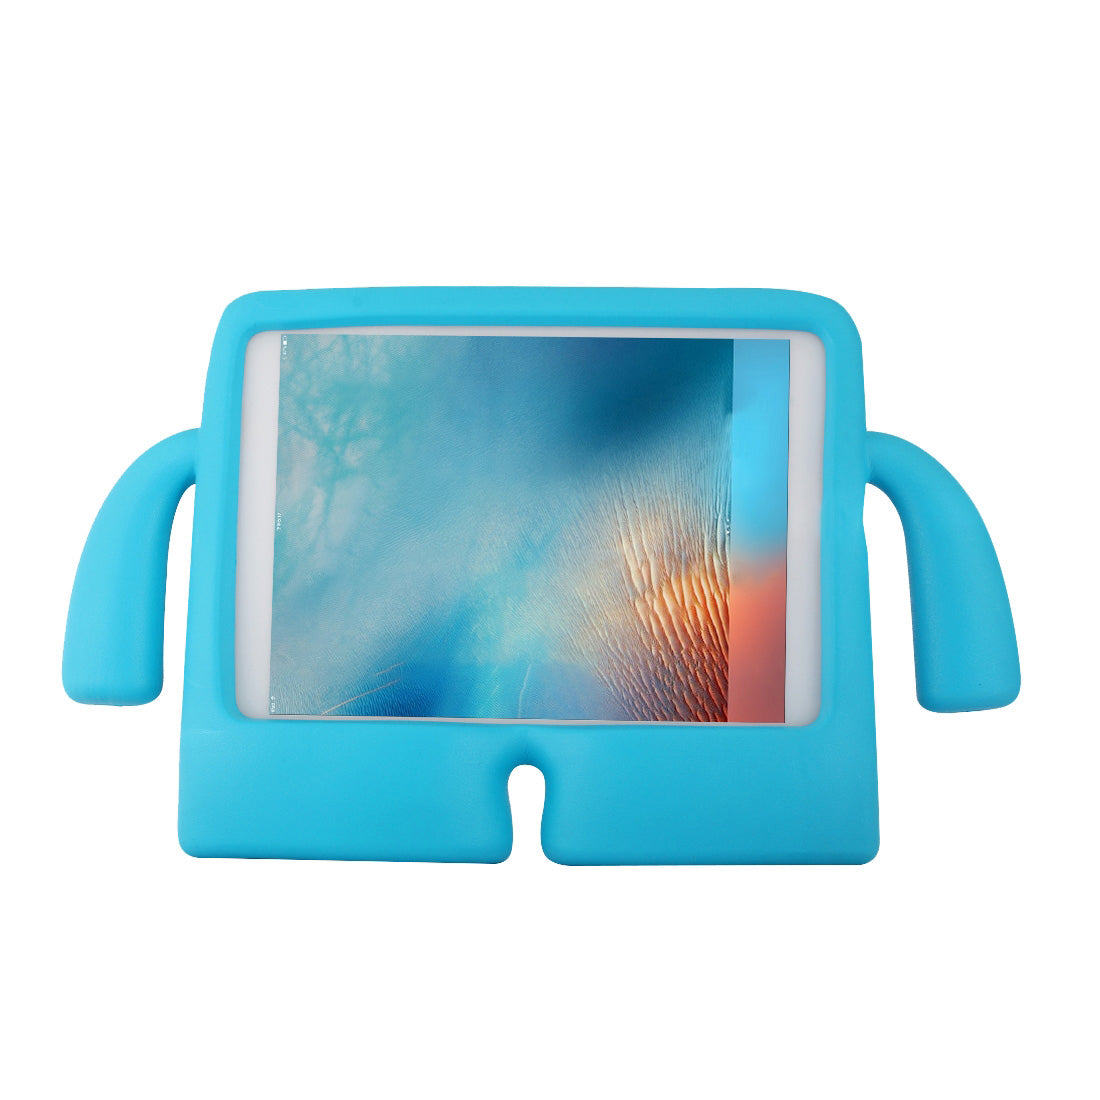 For Samsung Galaxy Tab A 8.0 2019 Kids Case Shockproof Cover With Carry Handle - Blue